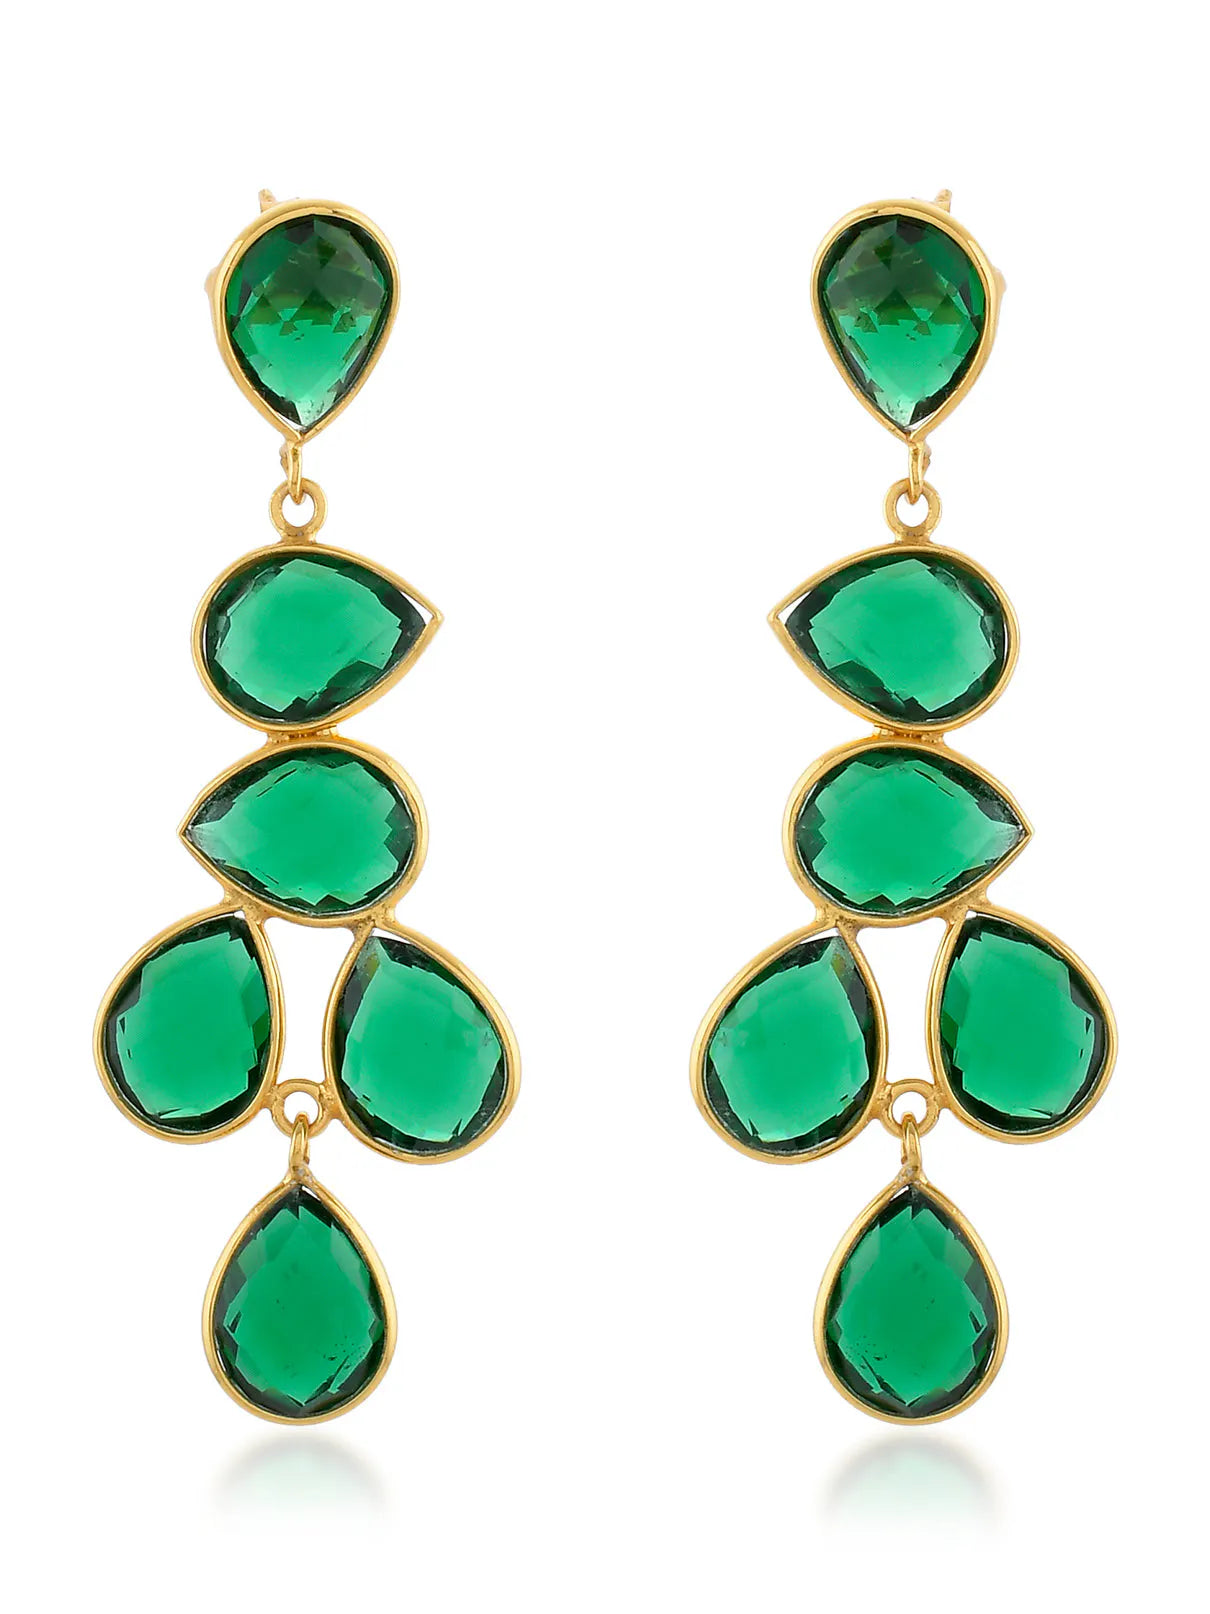 Shyla earrings adorned with deep emerald drop, an elegant evening accessory crafted in yellow gold.